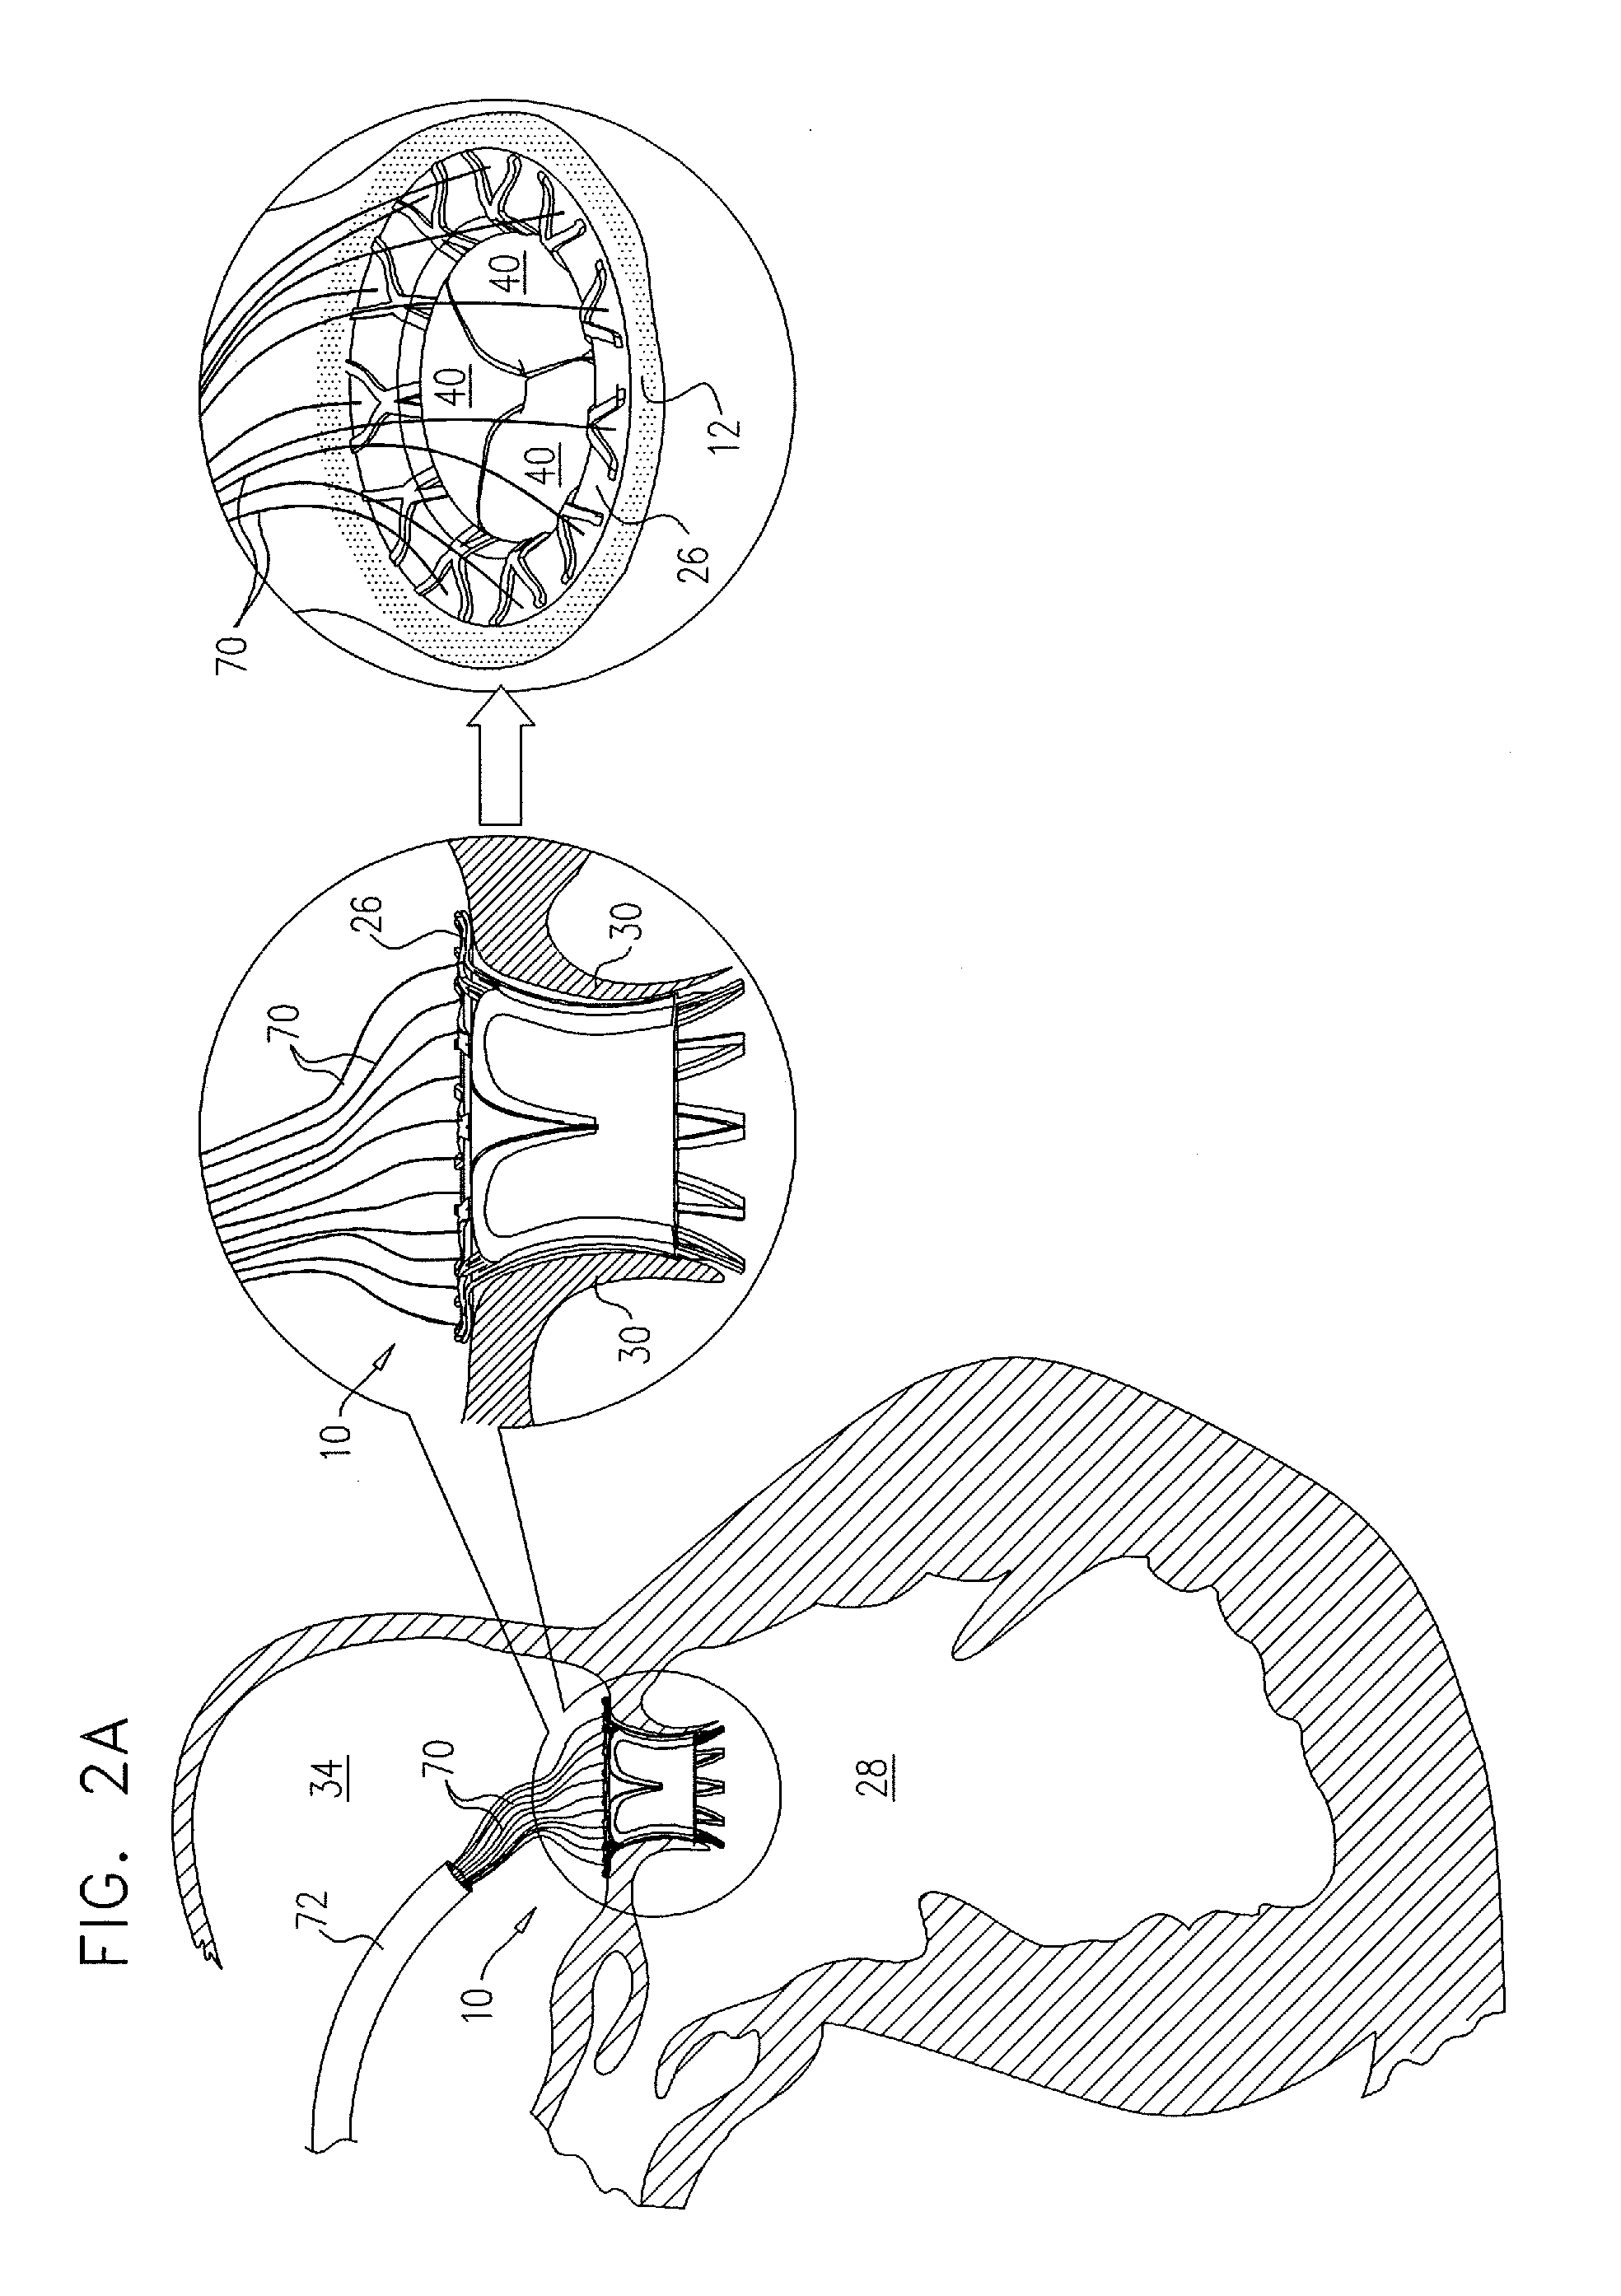 Prosthetic mitral valve with tissue anchors